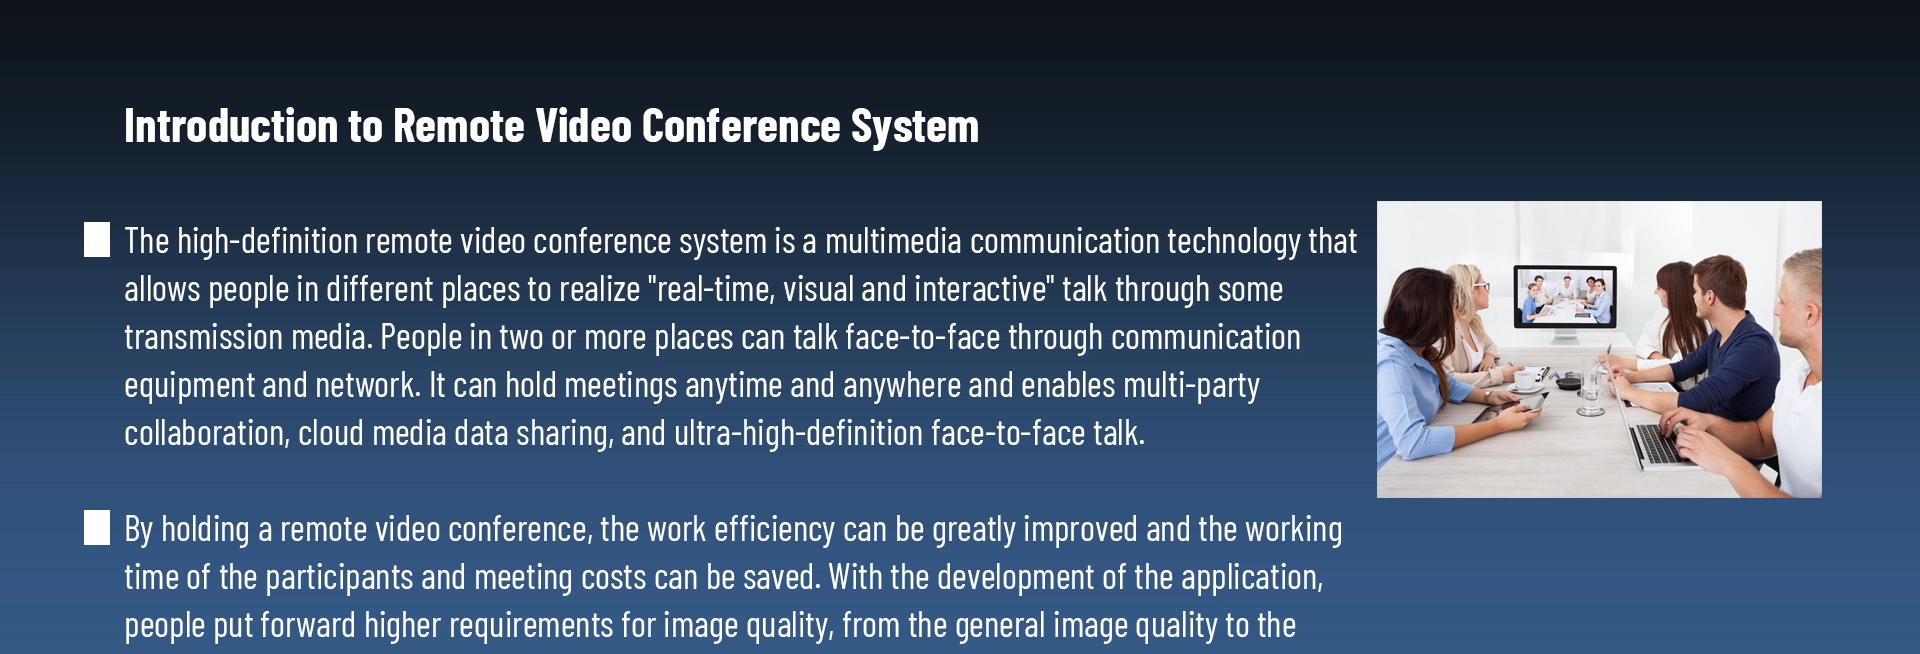 HD Video Conference MCU (16 channels)